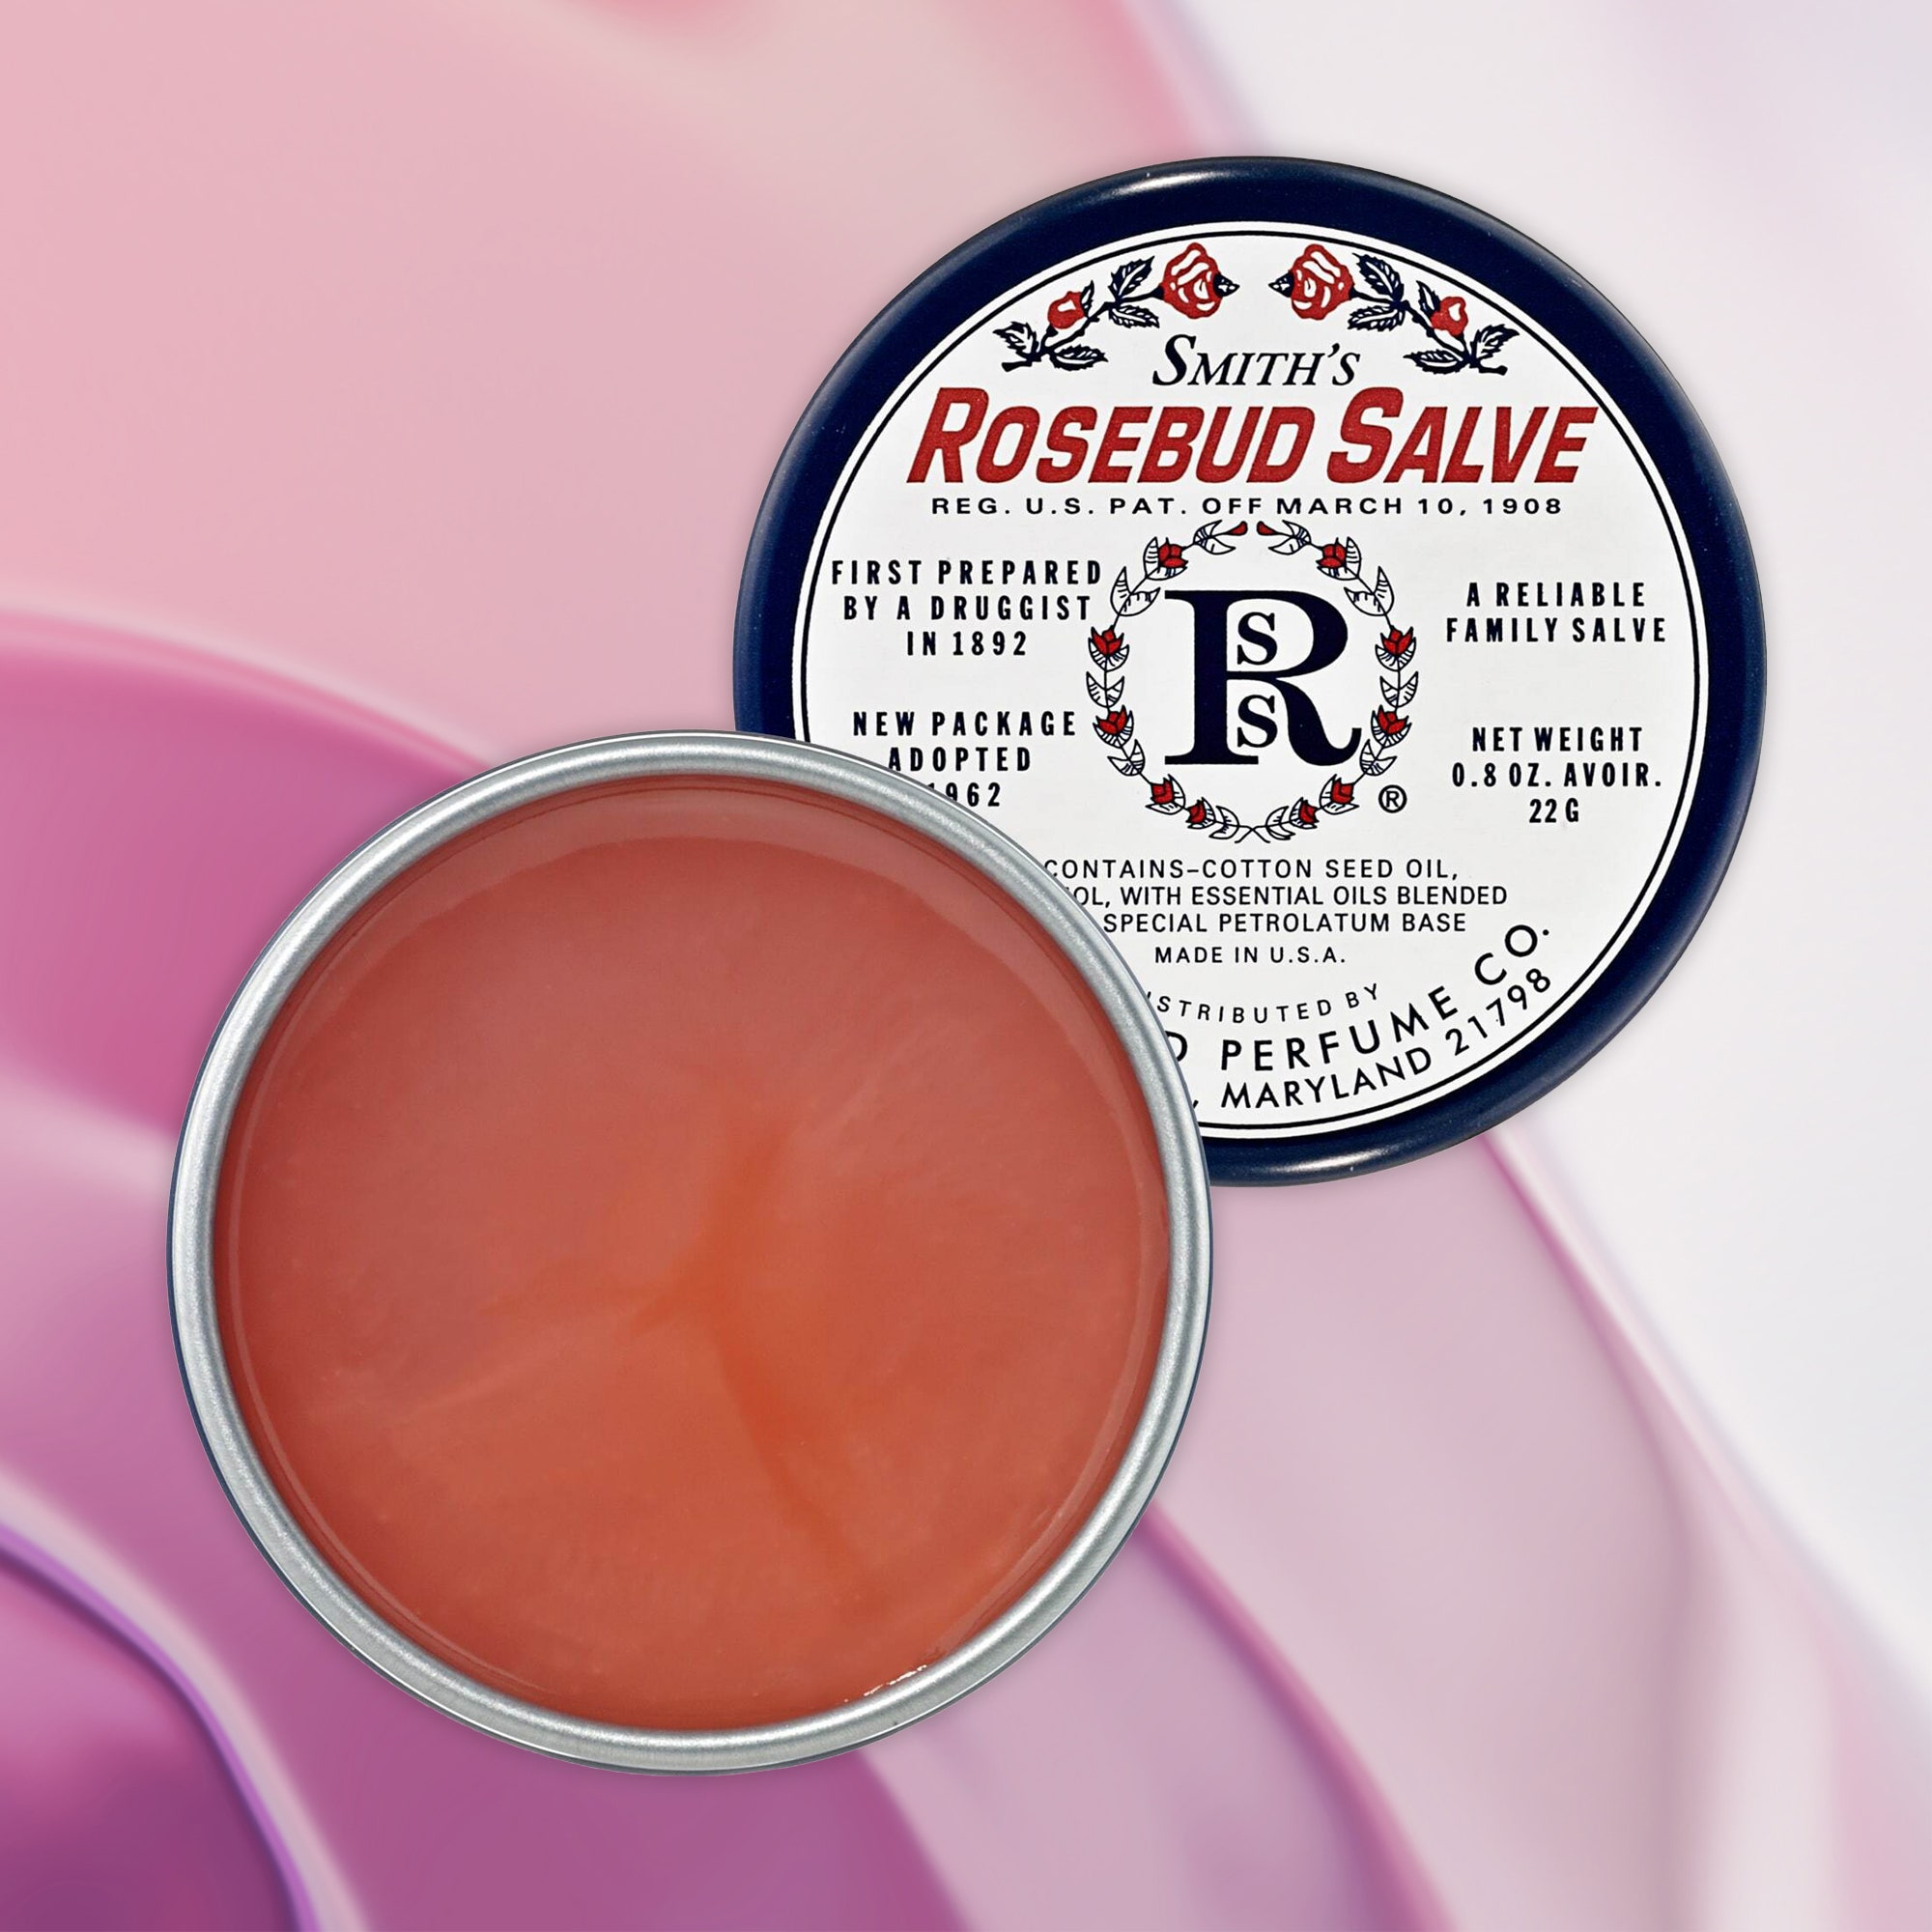 Smith's Rosebud Salve Is This Brow Artist's Secret to Fluffy, Full-Looking Eyebrows